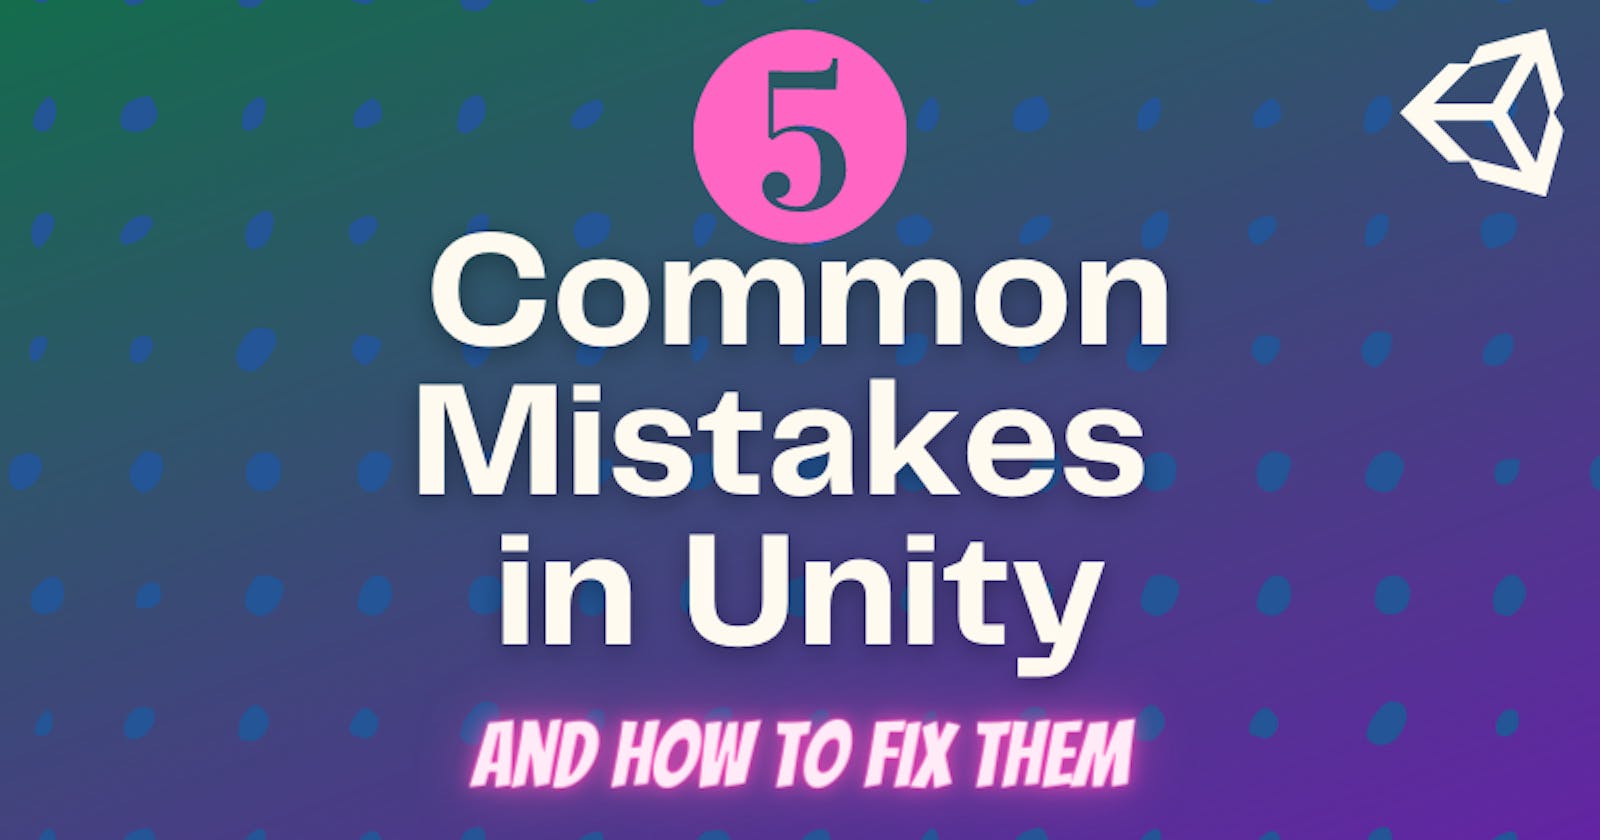 5 Common Mistakes in Unity (And How to Fix Them)